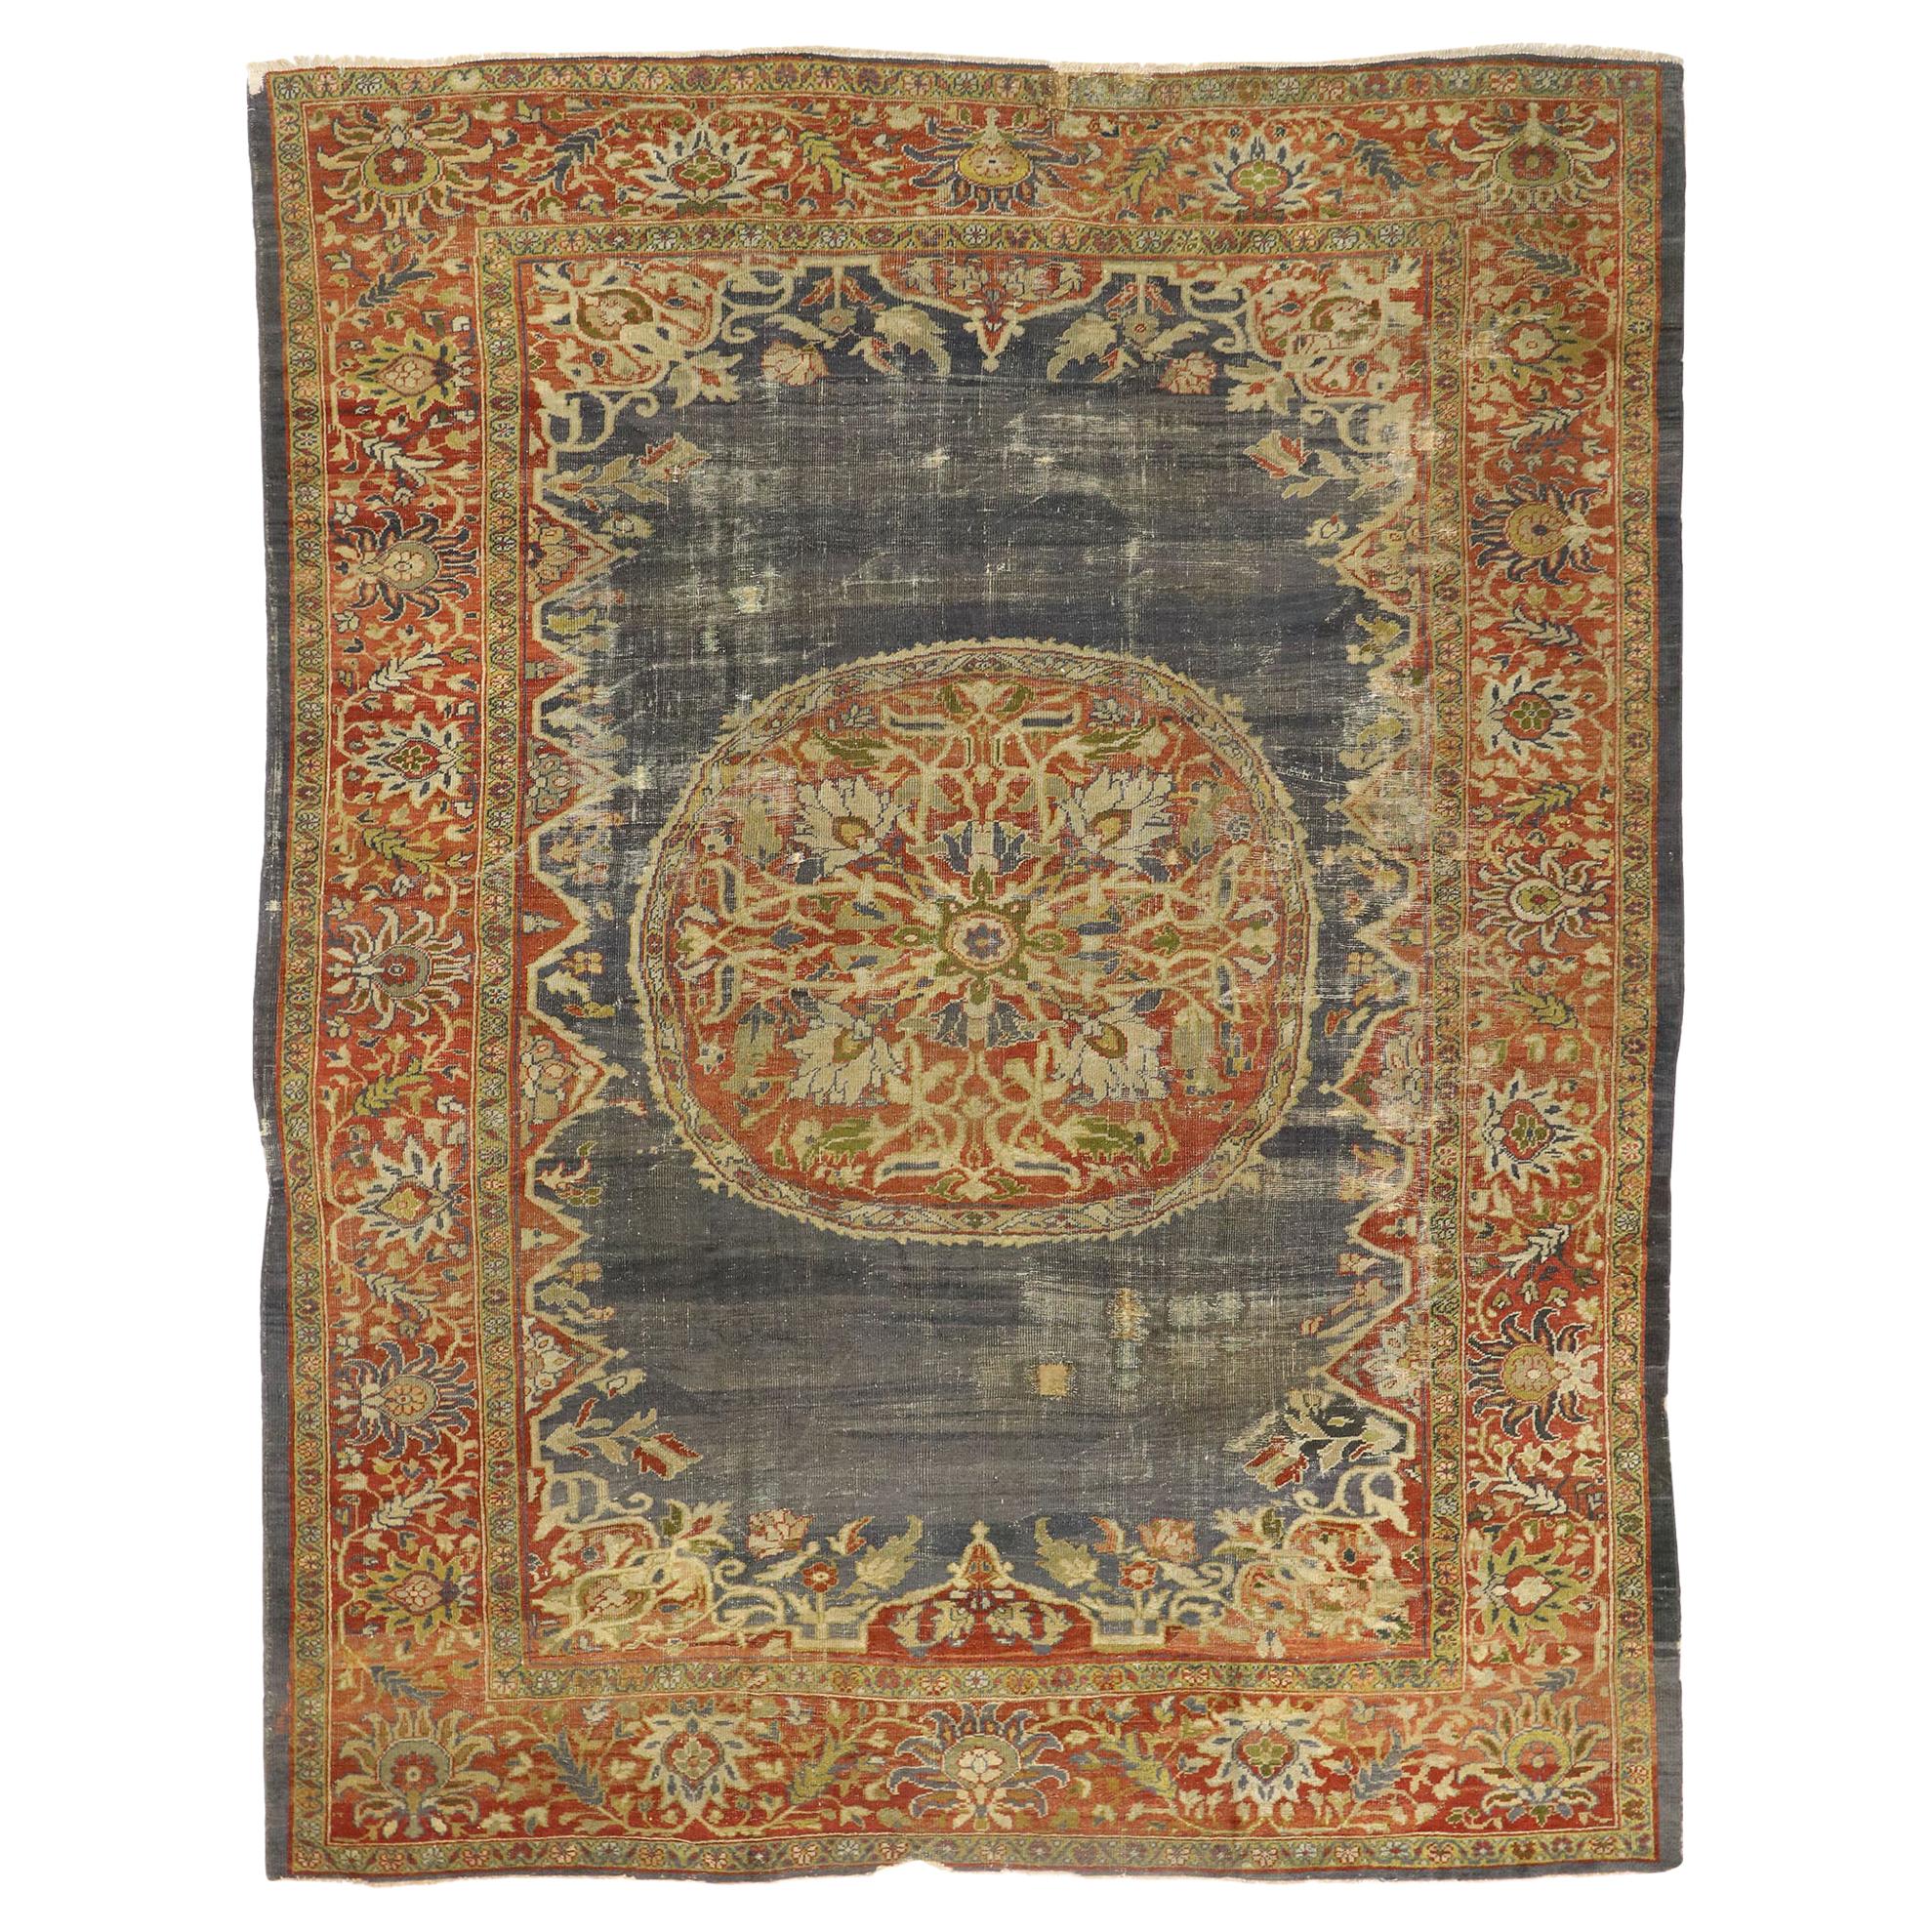 Distressed Antique Persian Sultanabad Rug with Rustic Artisan Industrial Style For Sale